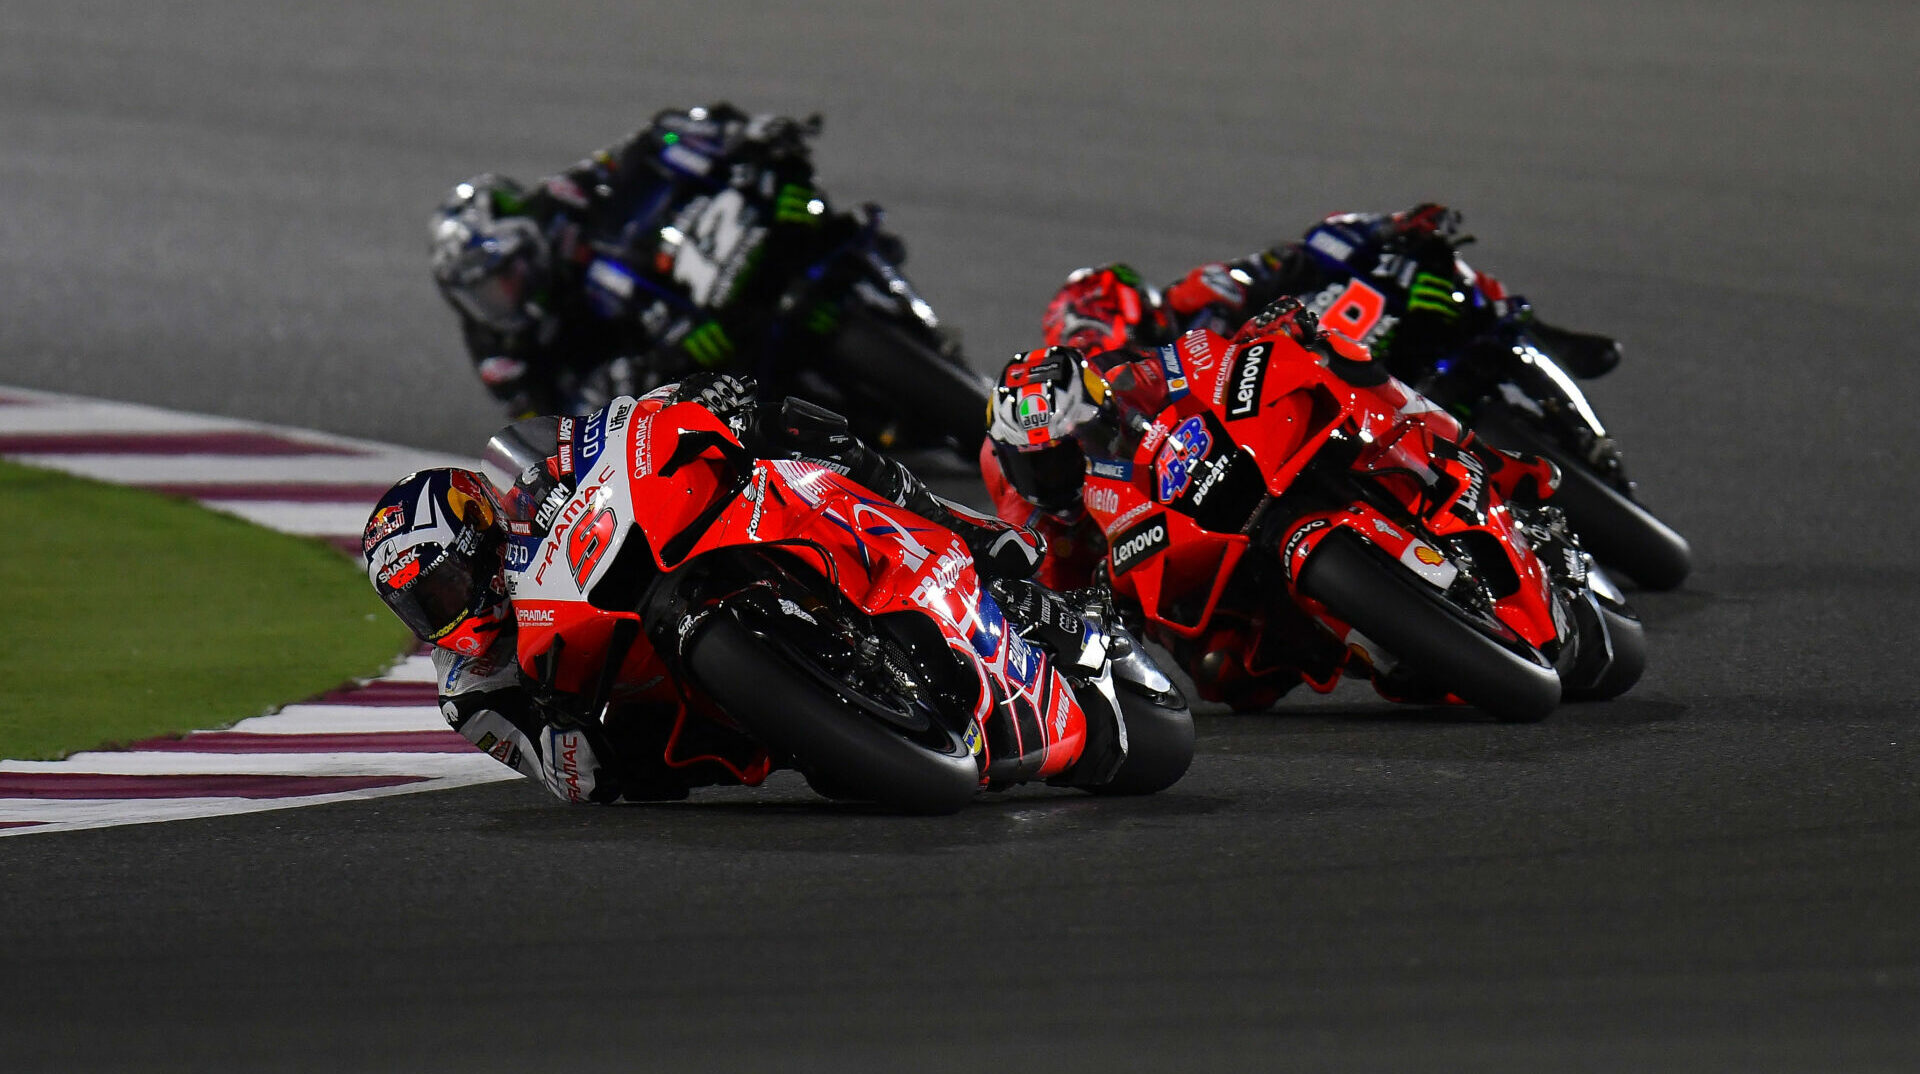 Johann Zarco (5), Jack Miller (43), Fabio Quartararo (20), and Maverick Vinales (12) race for the lead during the opening round of the 2021 MotoGP World Championship in Qatar. Photo courtesy Michelin.